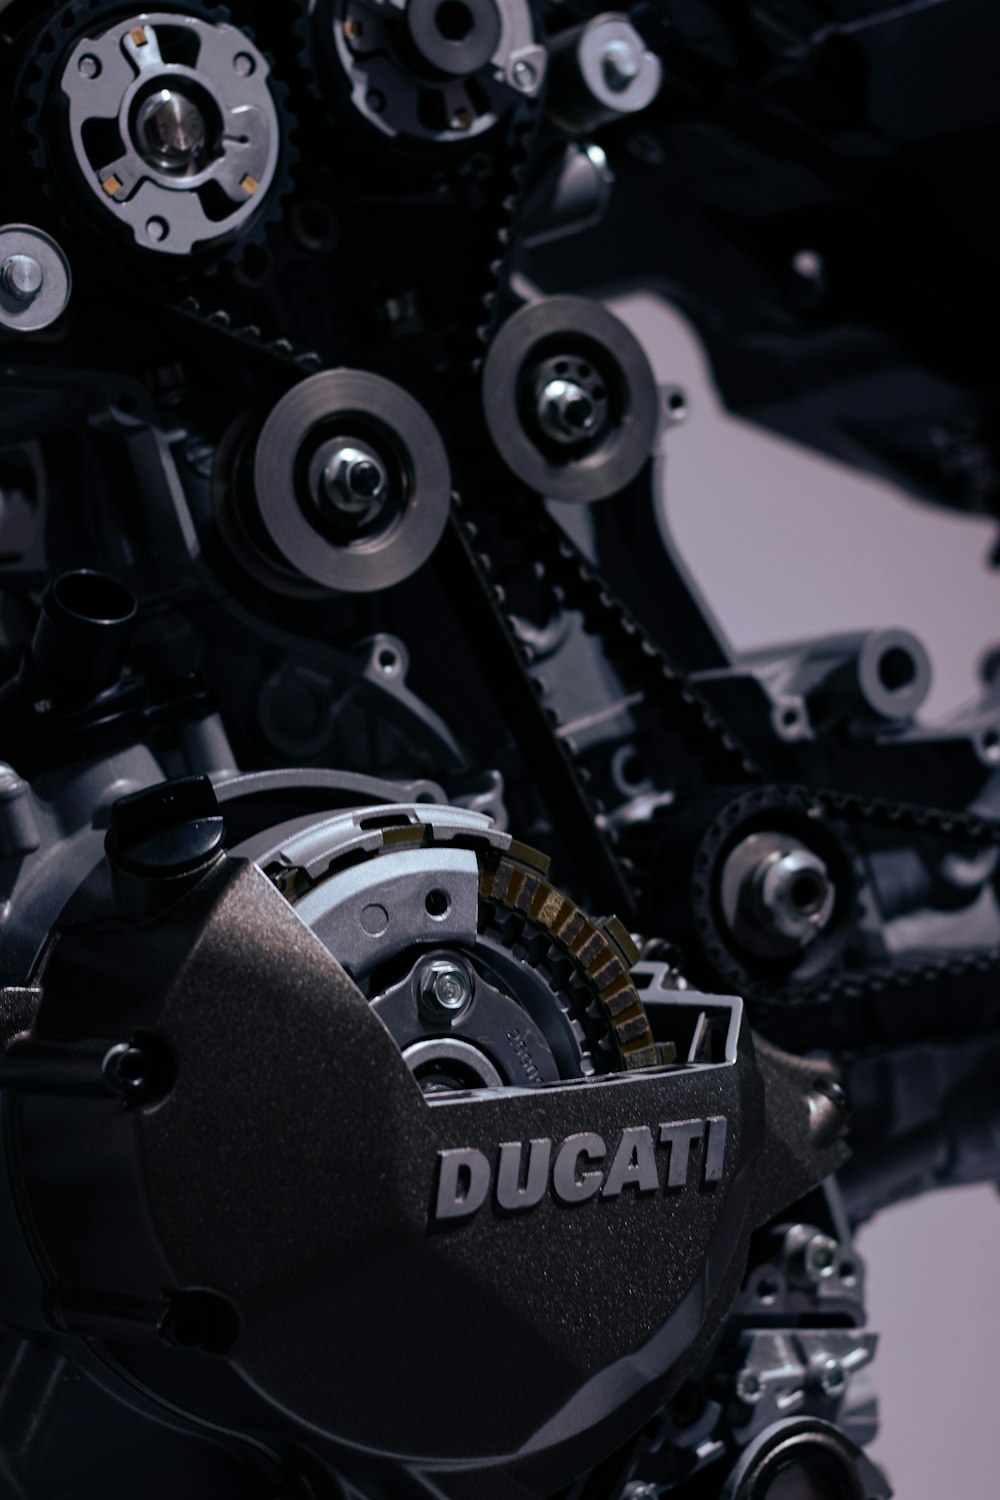 a close up view of a motorcycle engine